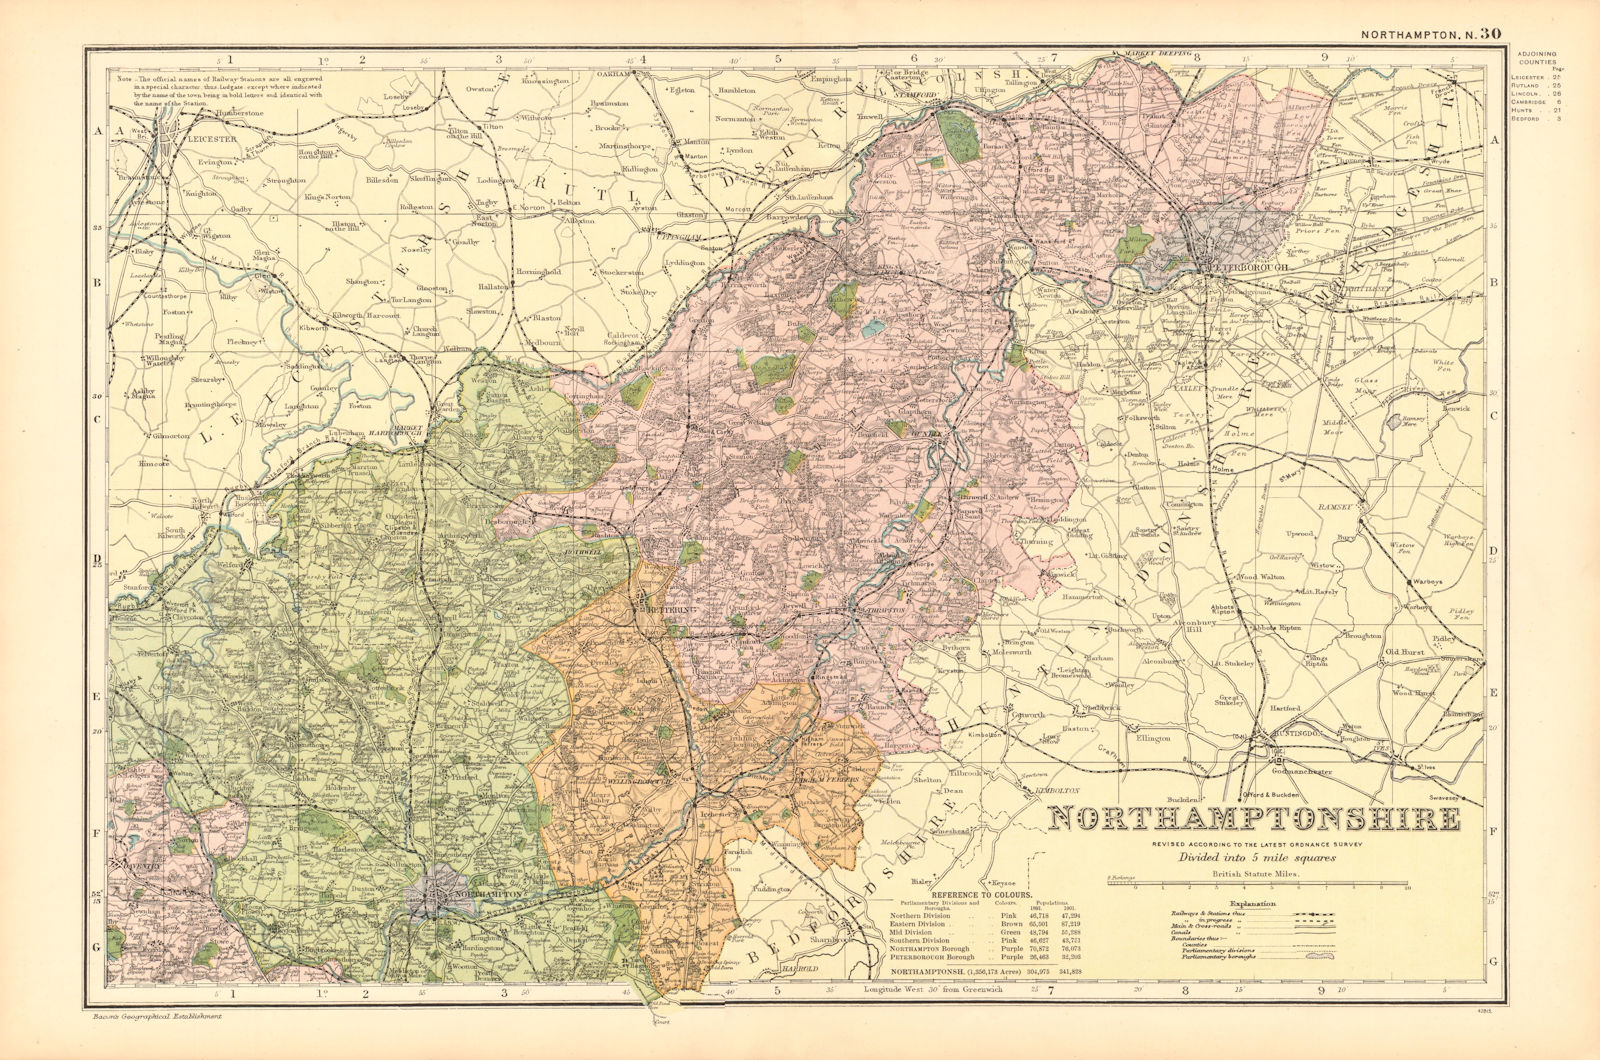 Associate Product NORTHAMPTONSHIRE (NORTH). Constituencies, boroughs & parks. BACON 1904 old map